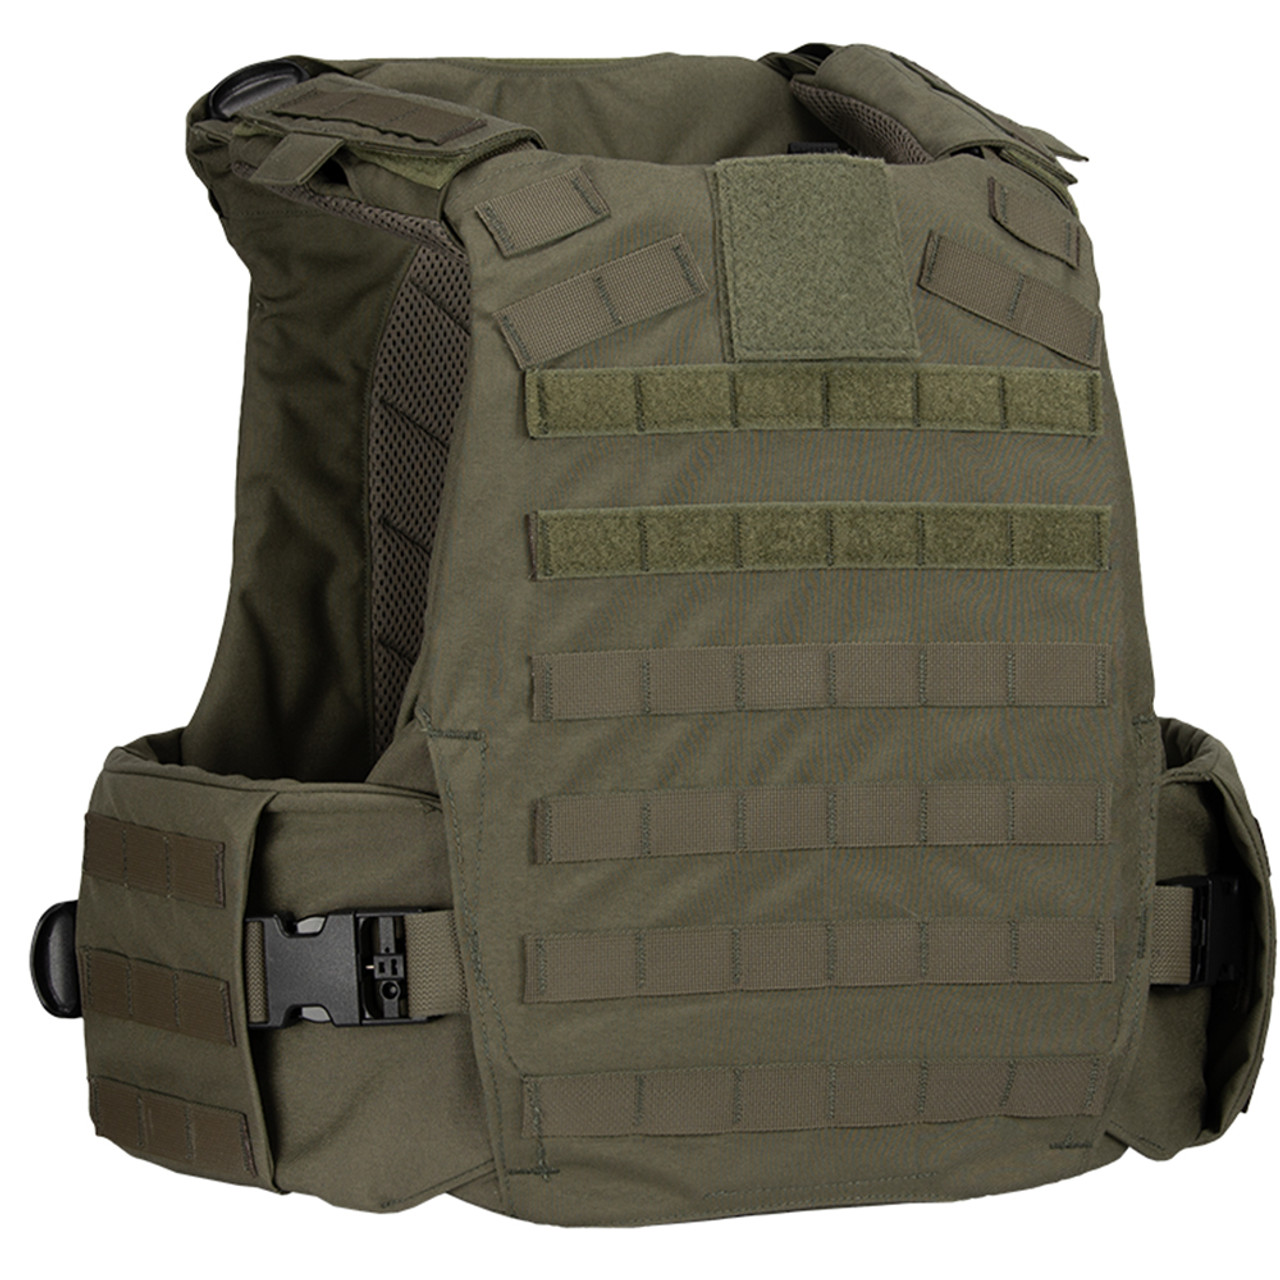 Armor Express ® Fearless Overt Tactical Ballistic Body Armor Carrier Combo With 4 Point Quick